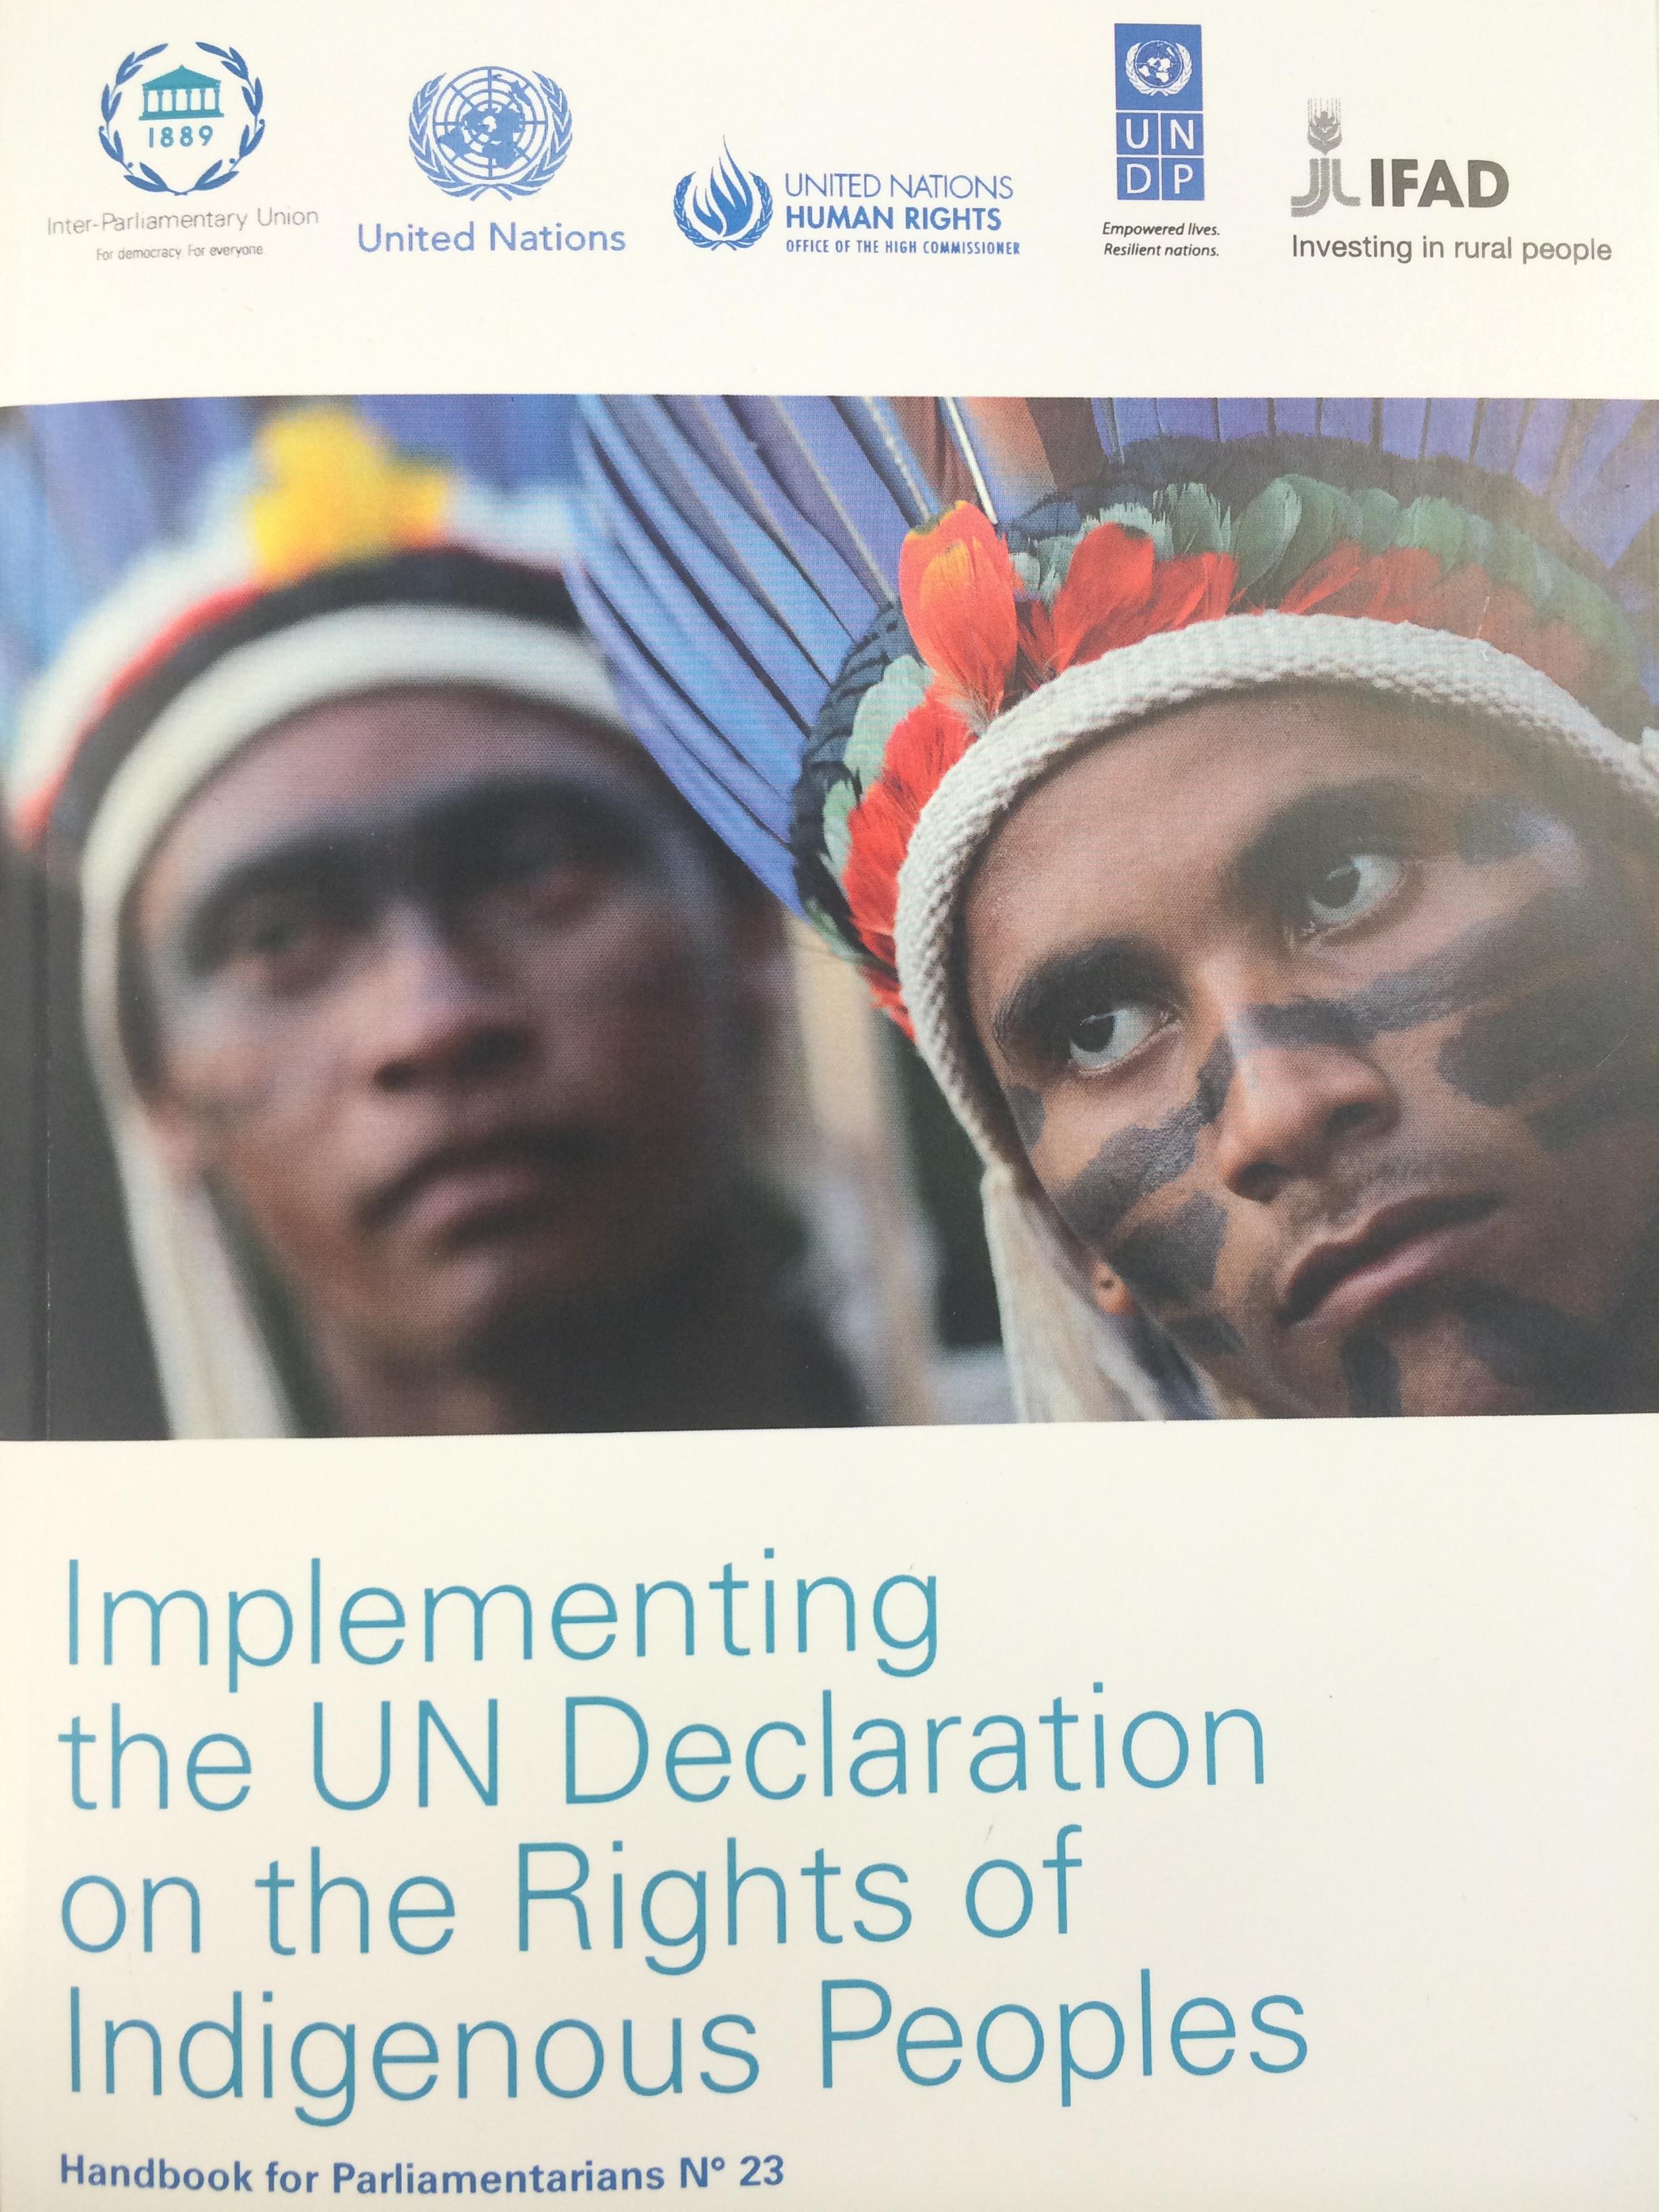 Parliamentarians Handbook on Implementing the UN Declaration on the Rights of Indigenous Peoples